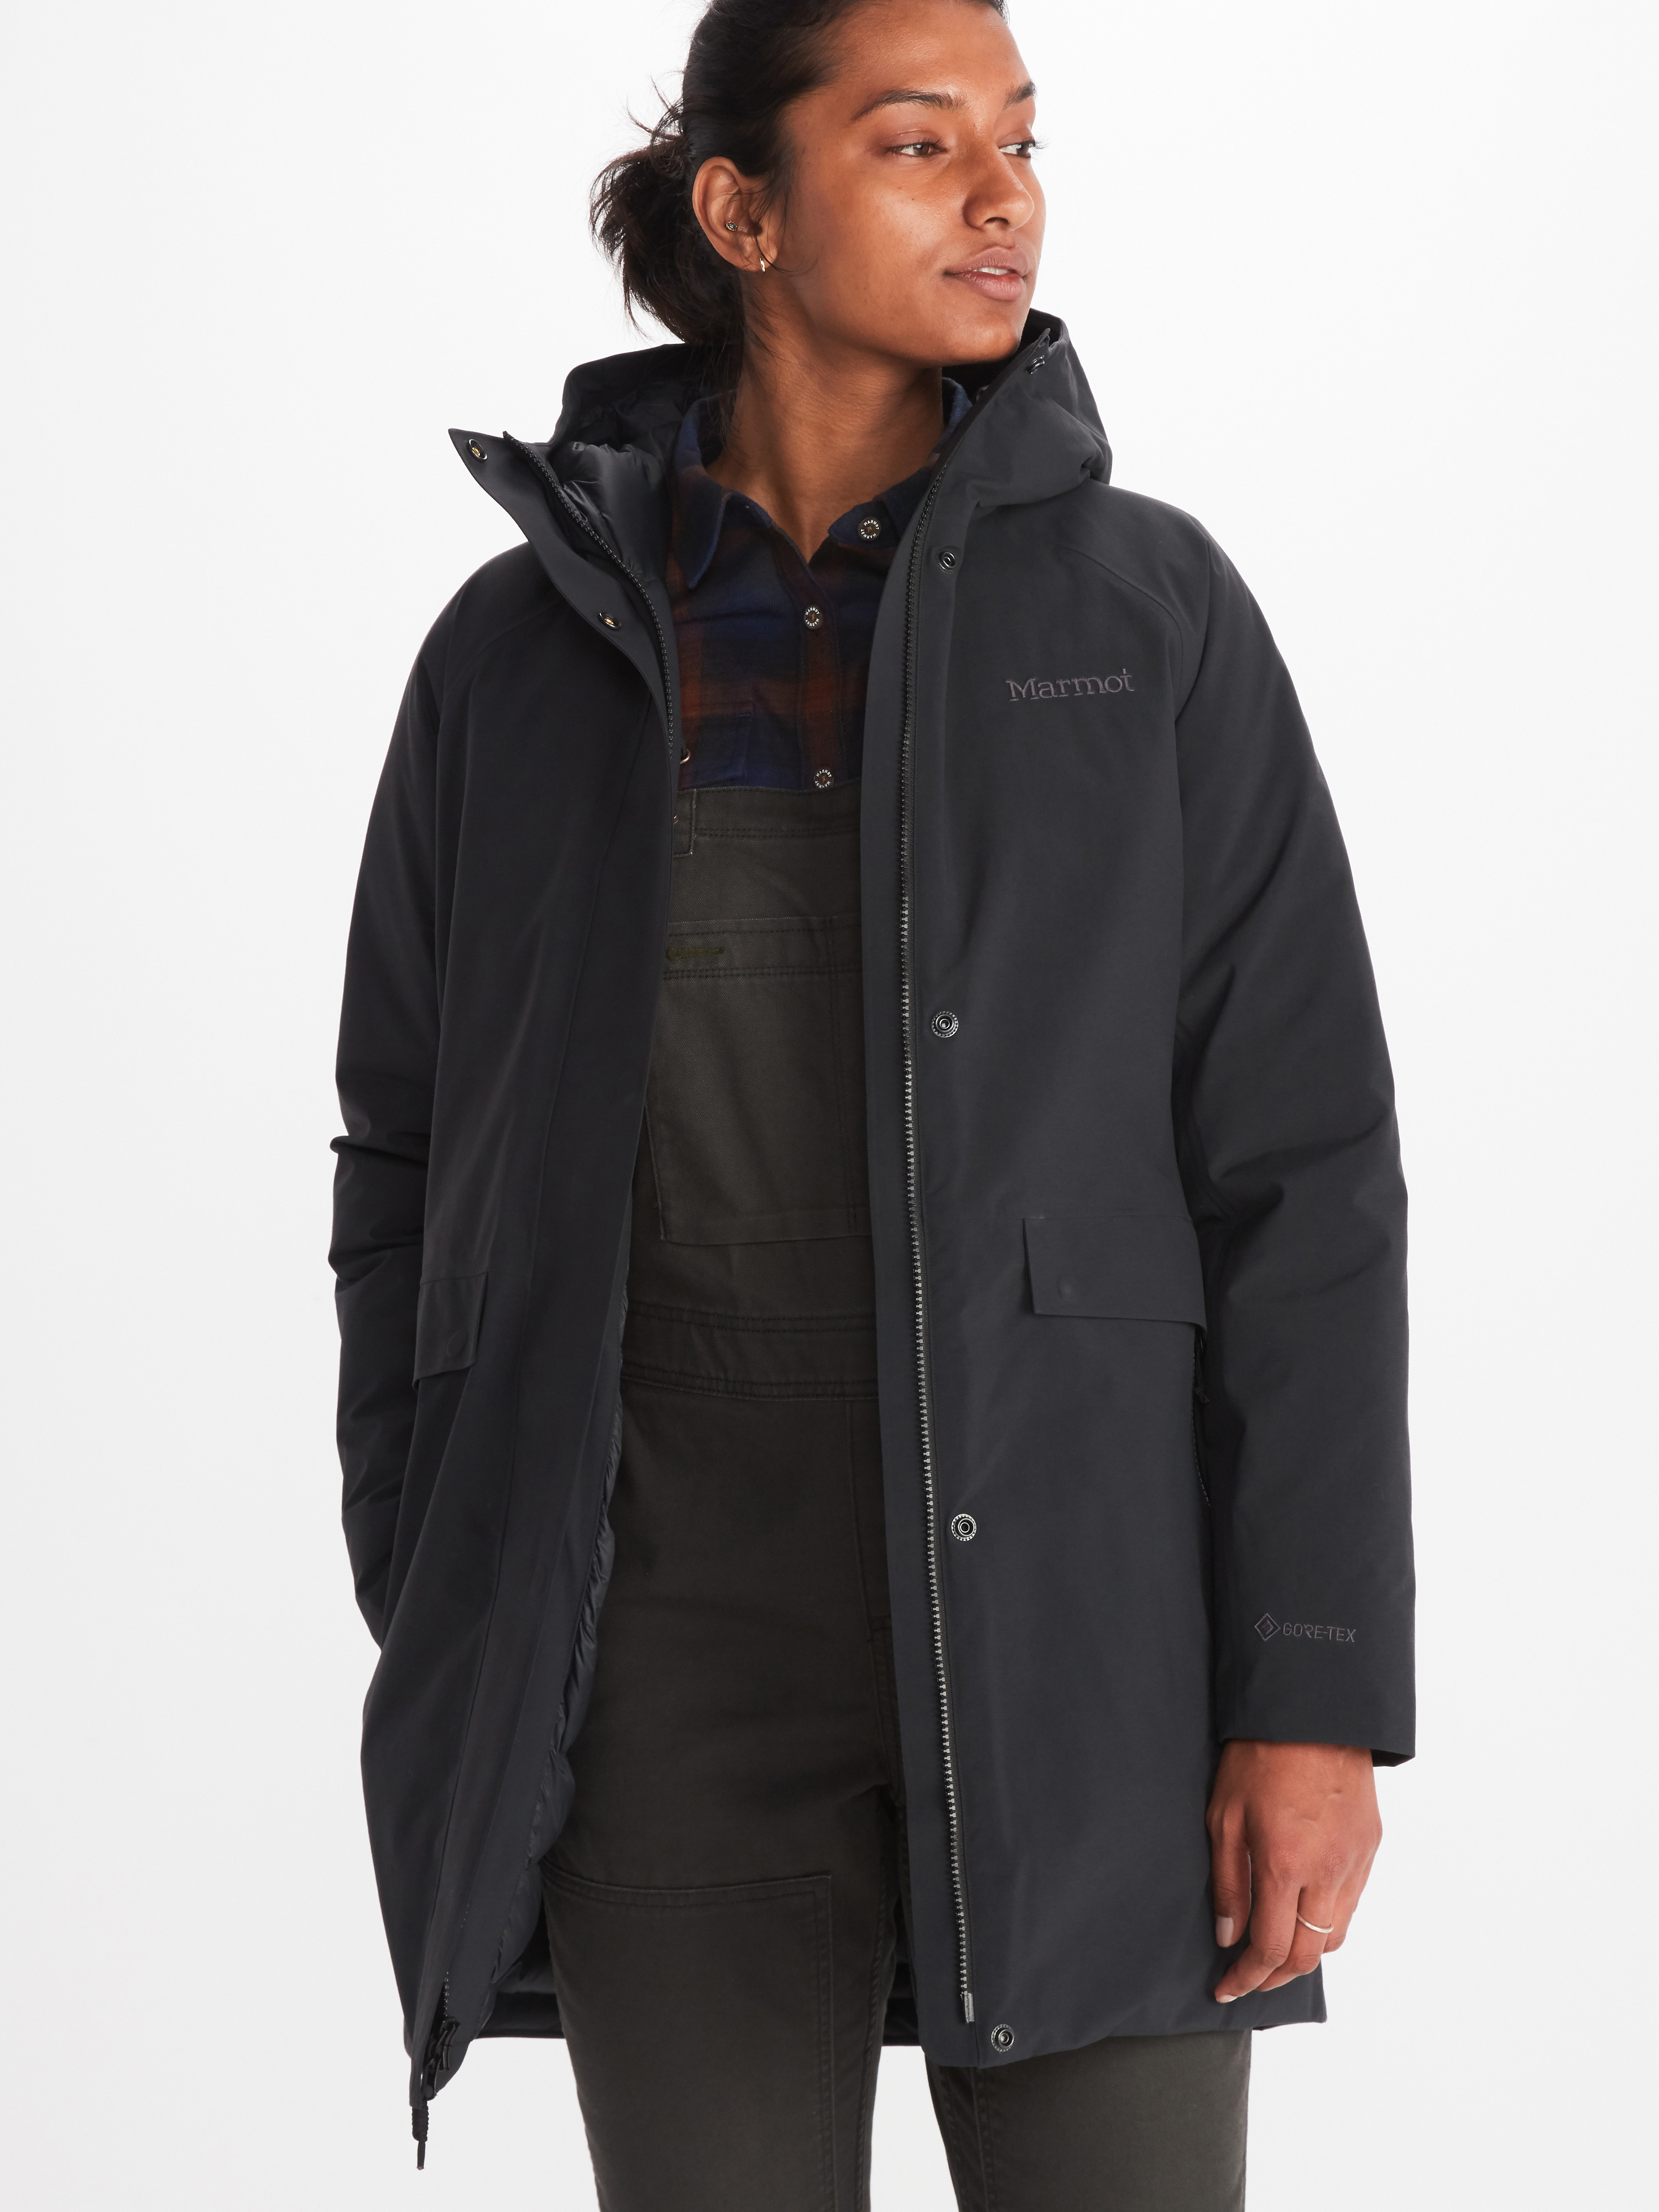 Sale: Men's & Women's Jackets and Outdoor Clothing | Marmot